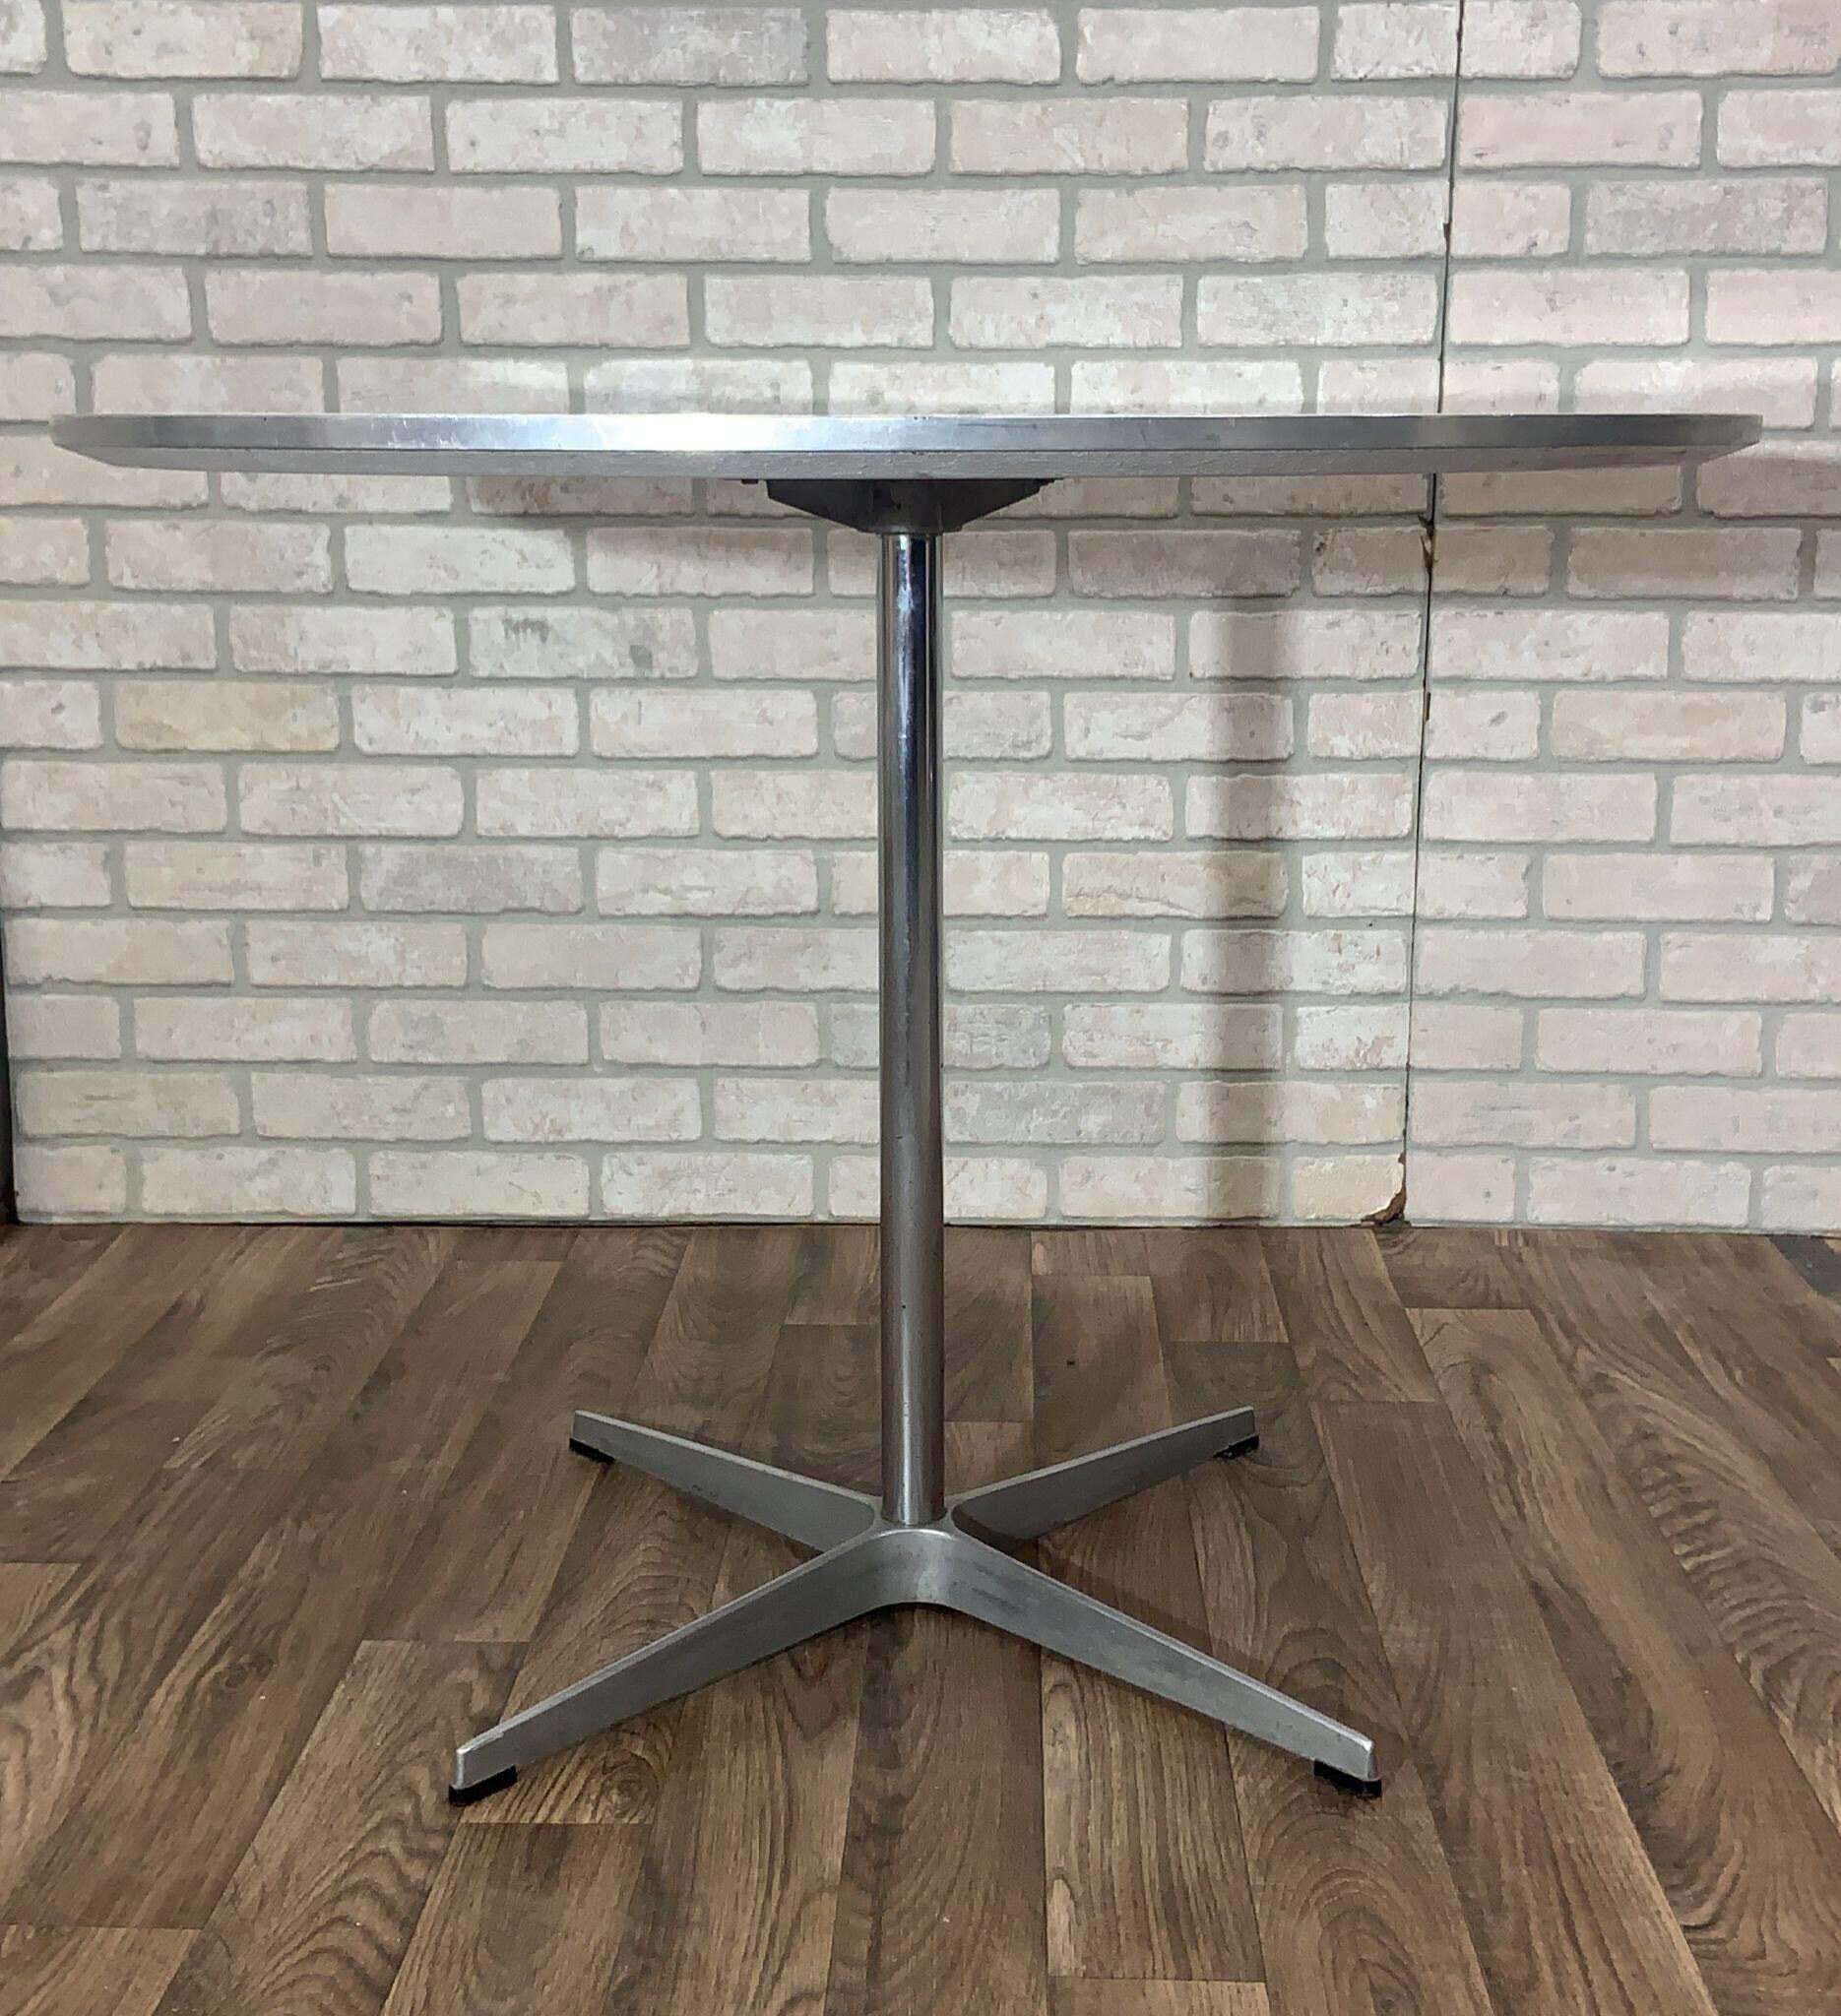 Vintage Mid Century Modern Fritz Hansen Space Cafe Table

This white laminate circular cafe table has a silver metal rim. It was designed by Arne Jacobsen for Fritz Hansen. This classic mid-century modern piece would be a sleek addition to your